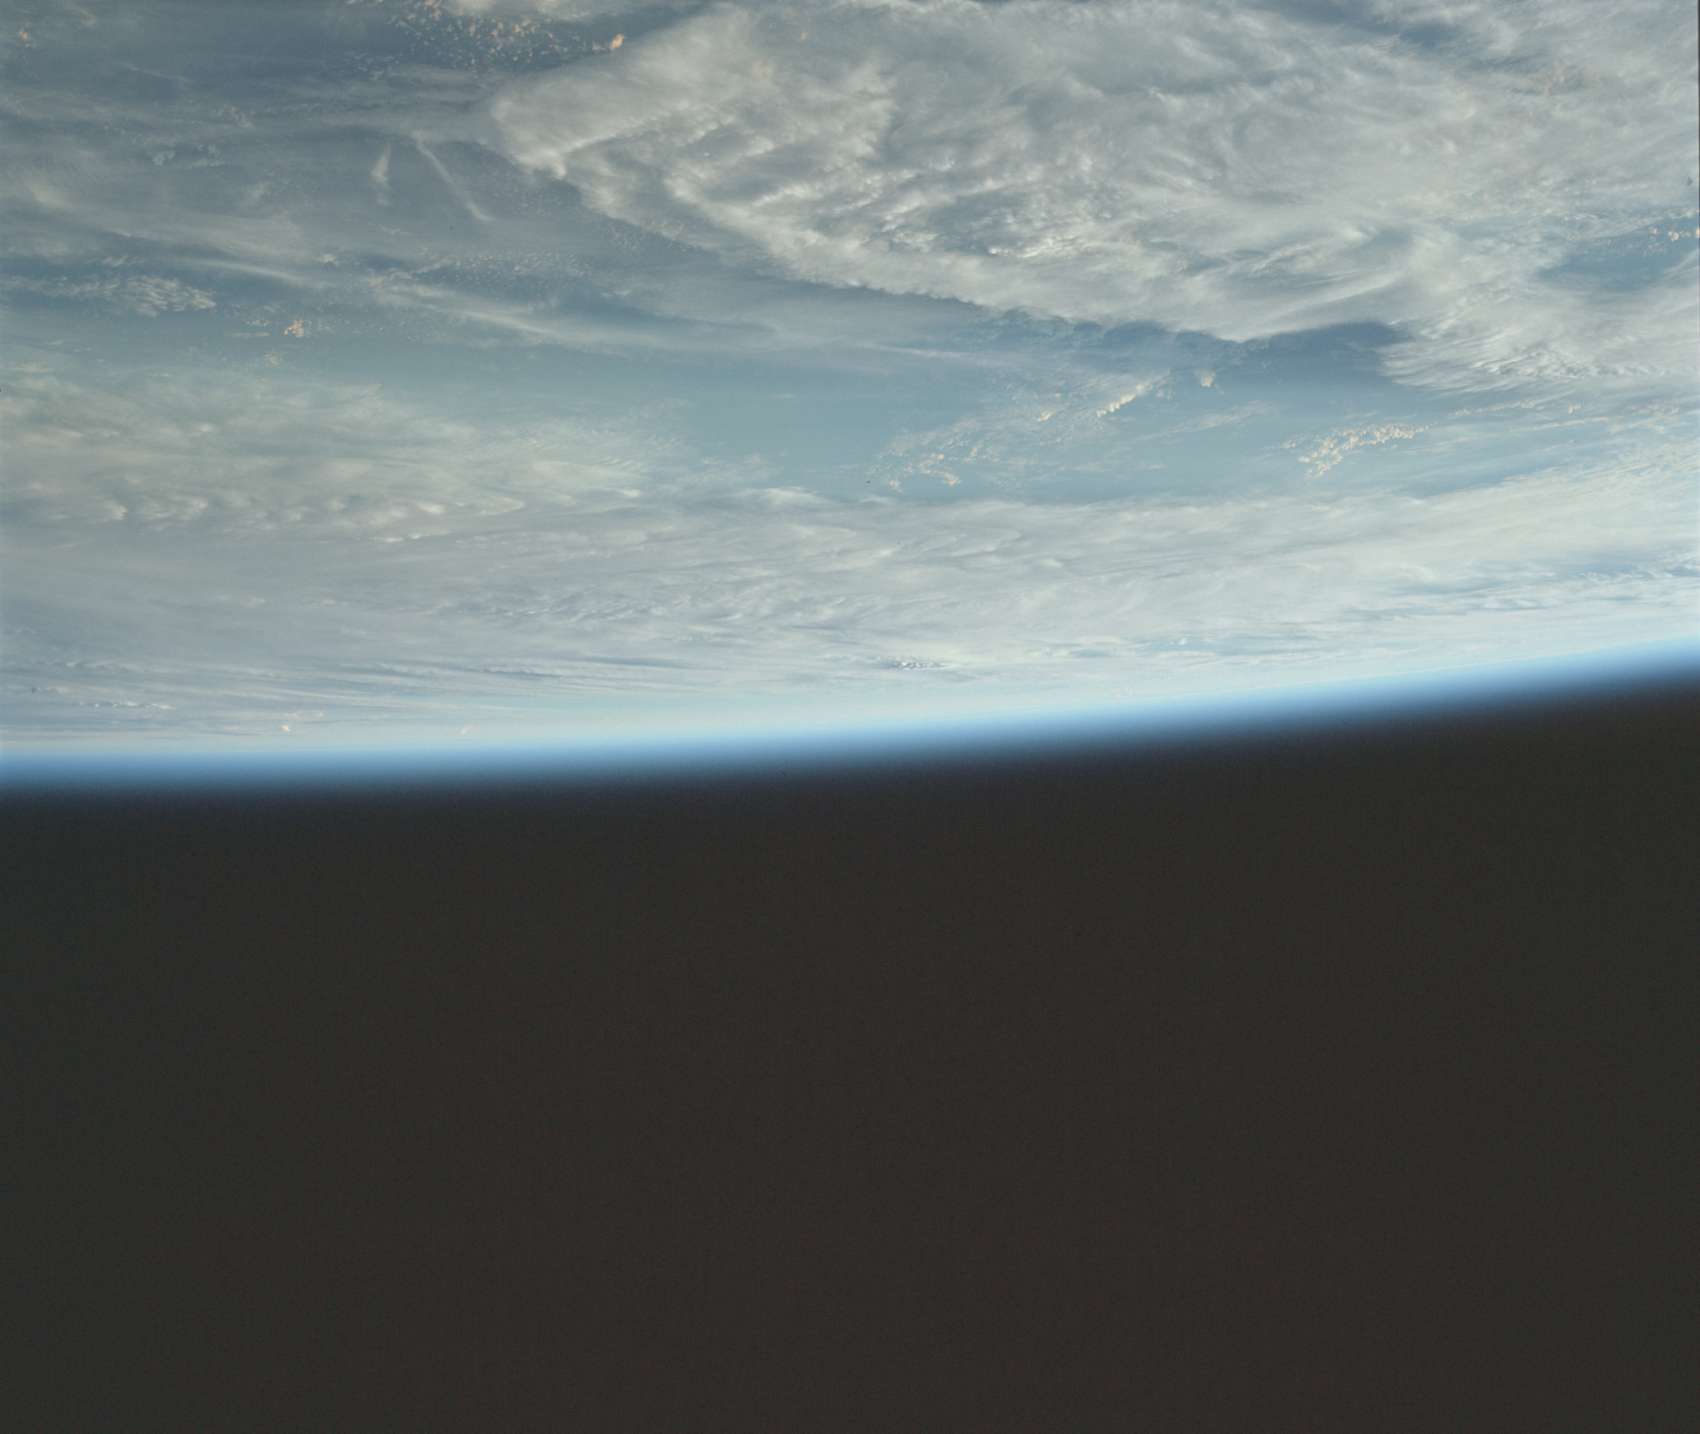 Inverted image of the earth's surface against a black background